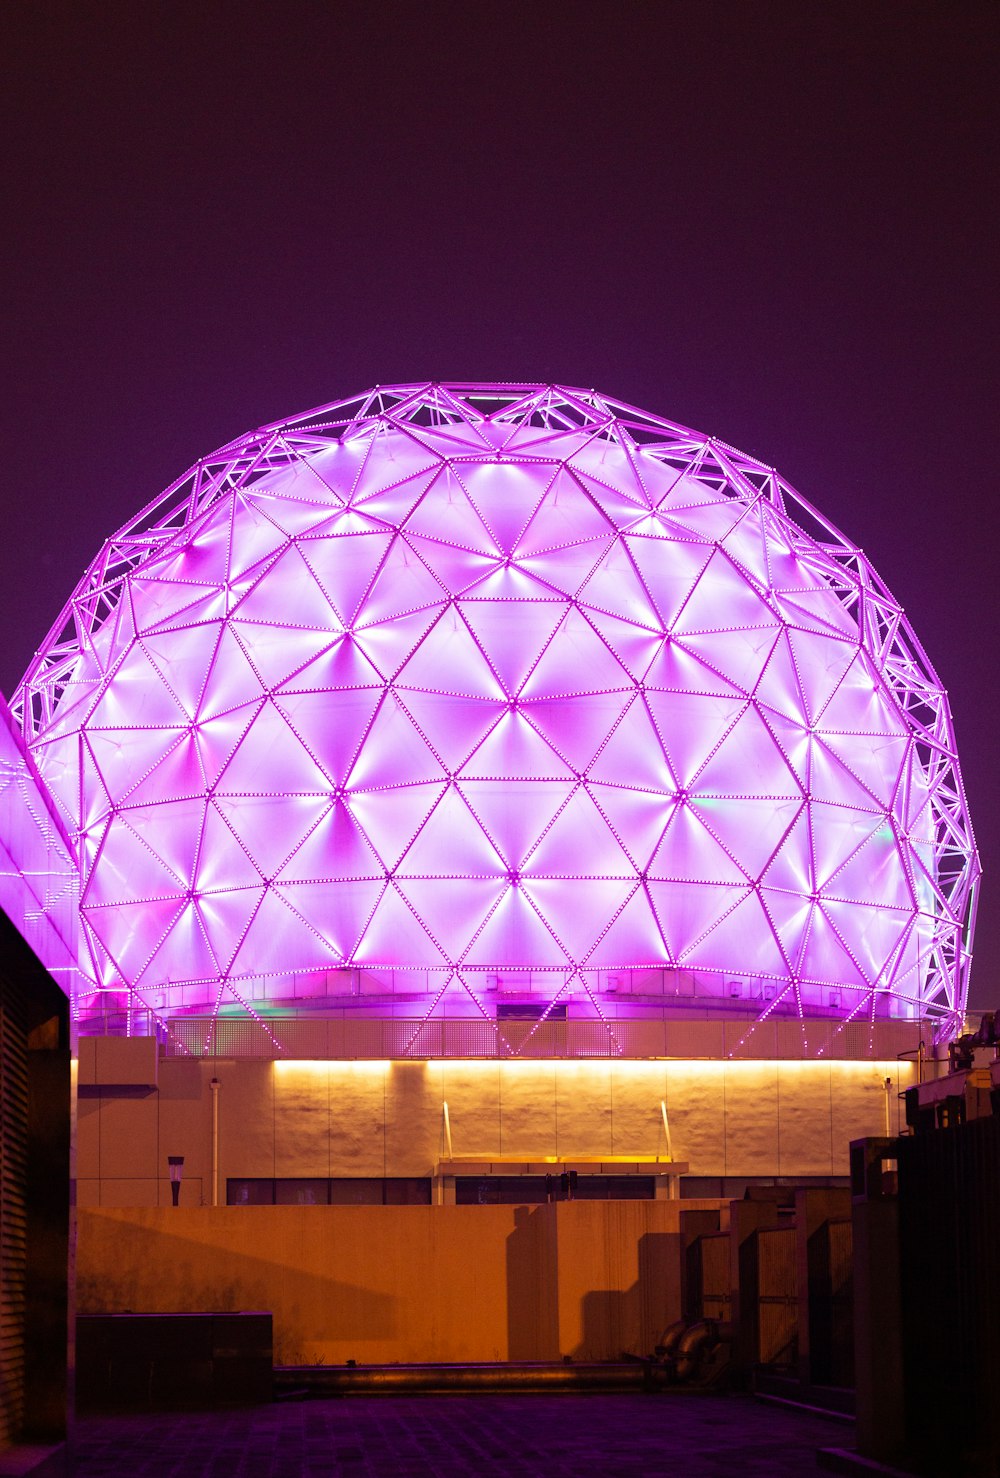 blue glass dome building during nighttime